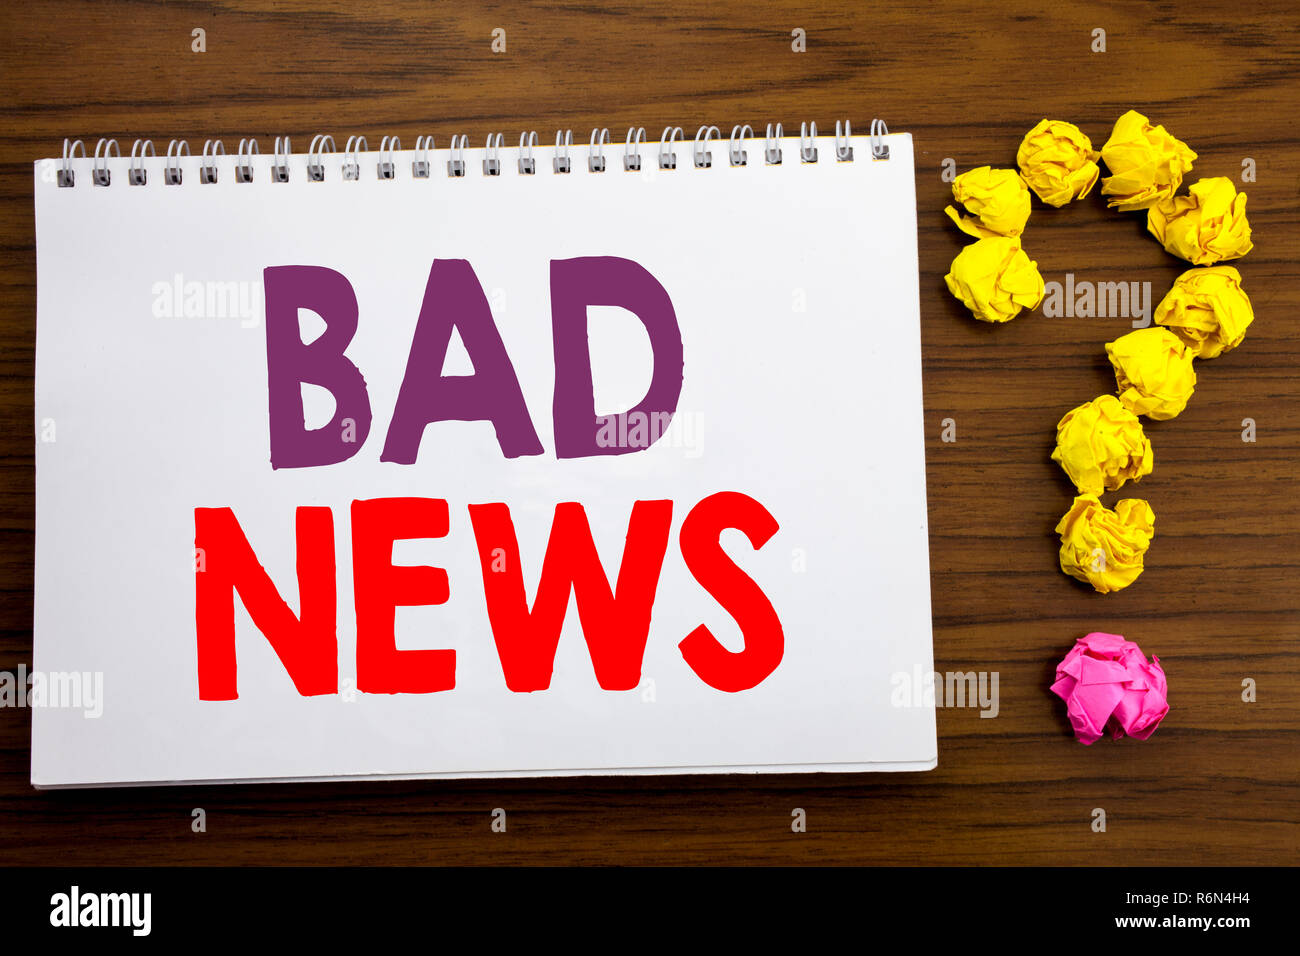 Conceptual hand writing caption inspiration showing Bad News. Business concept for Failure Media Newspaper written on notepad note paper on the wooden background with question mark. Stock Photo